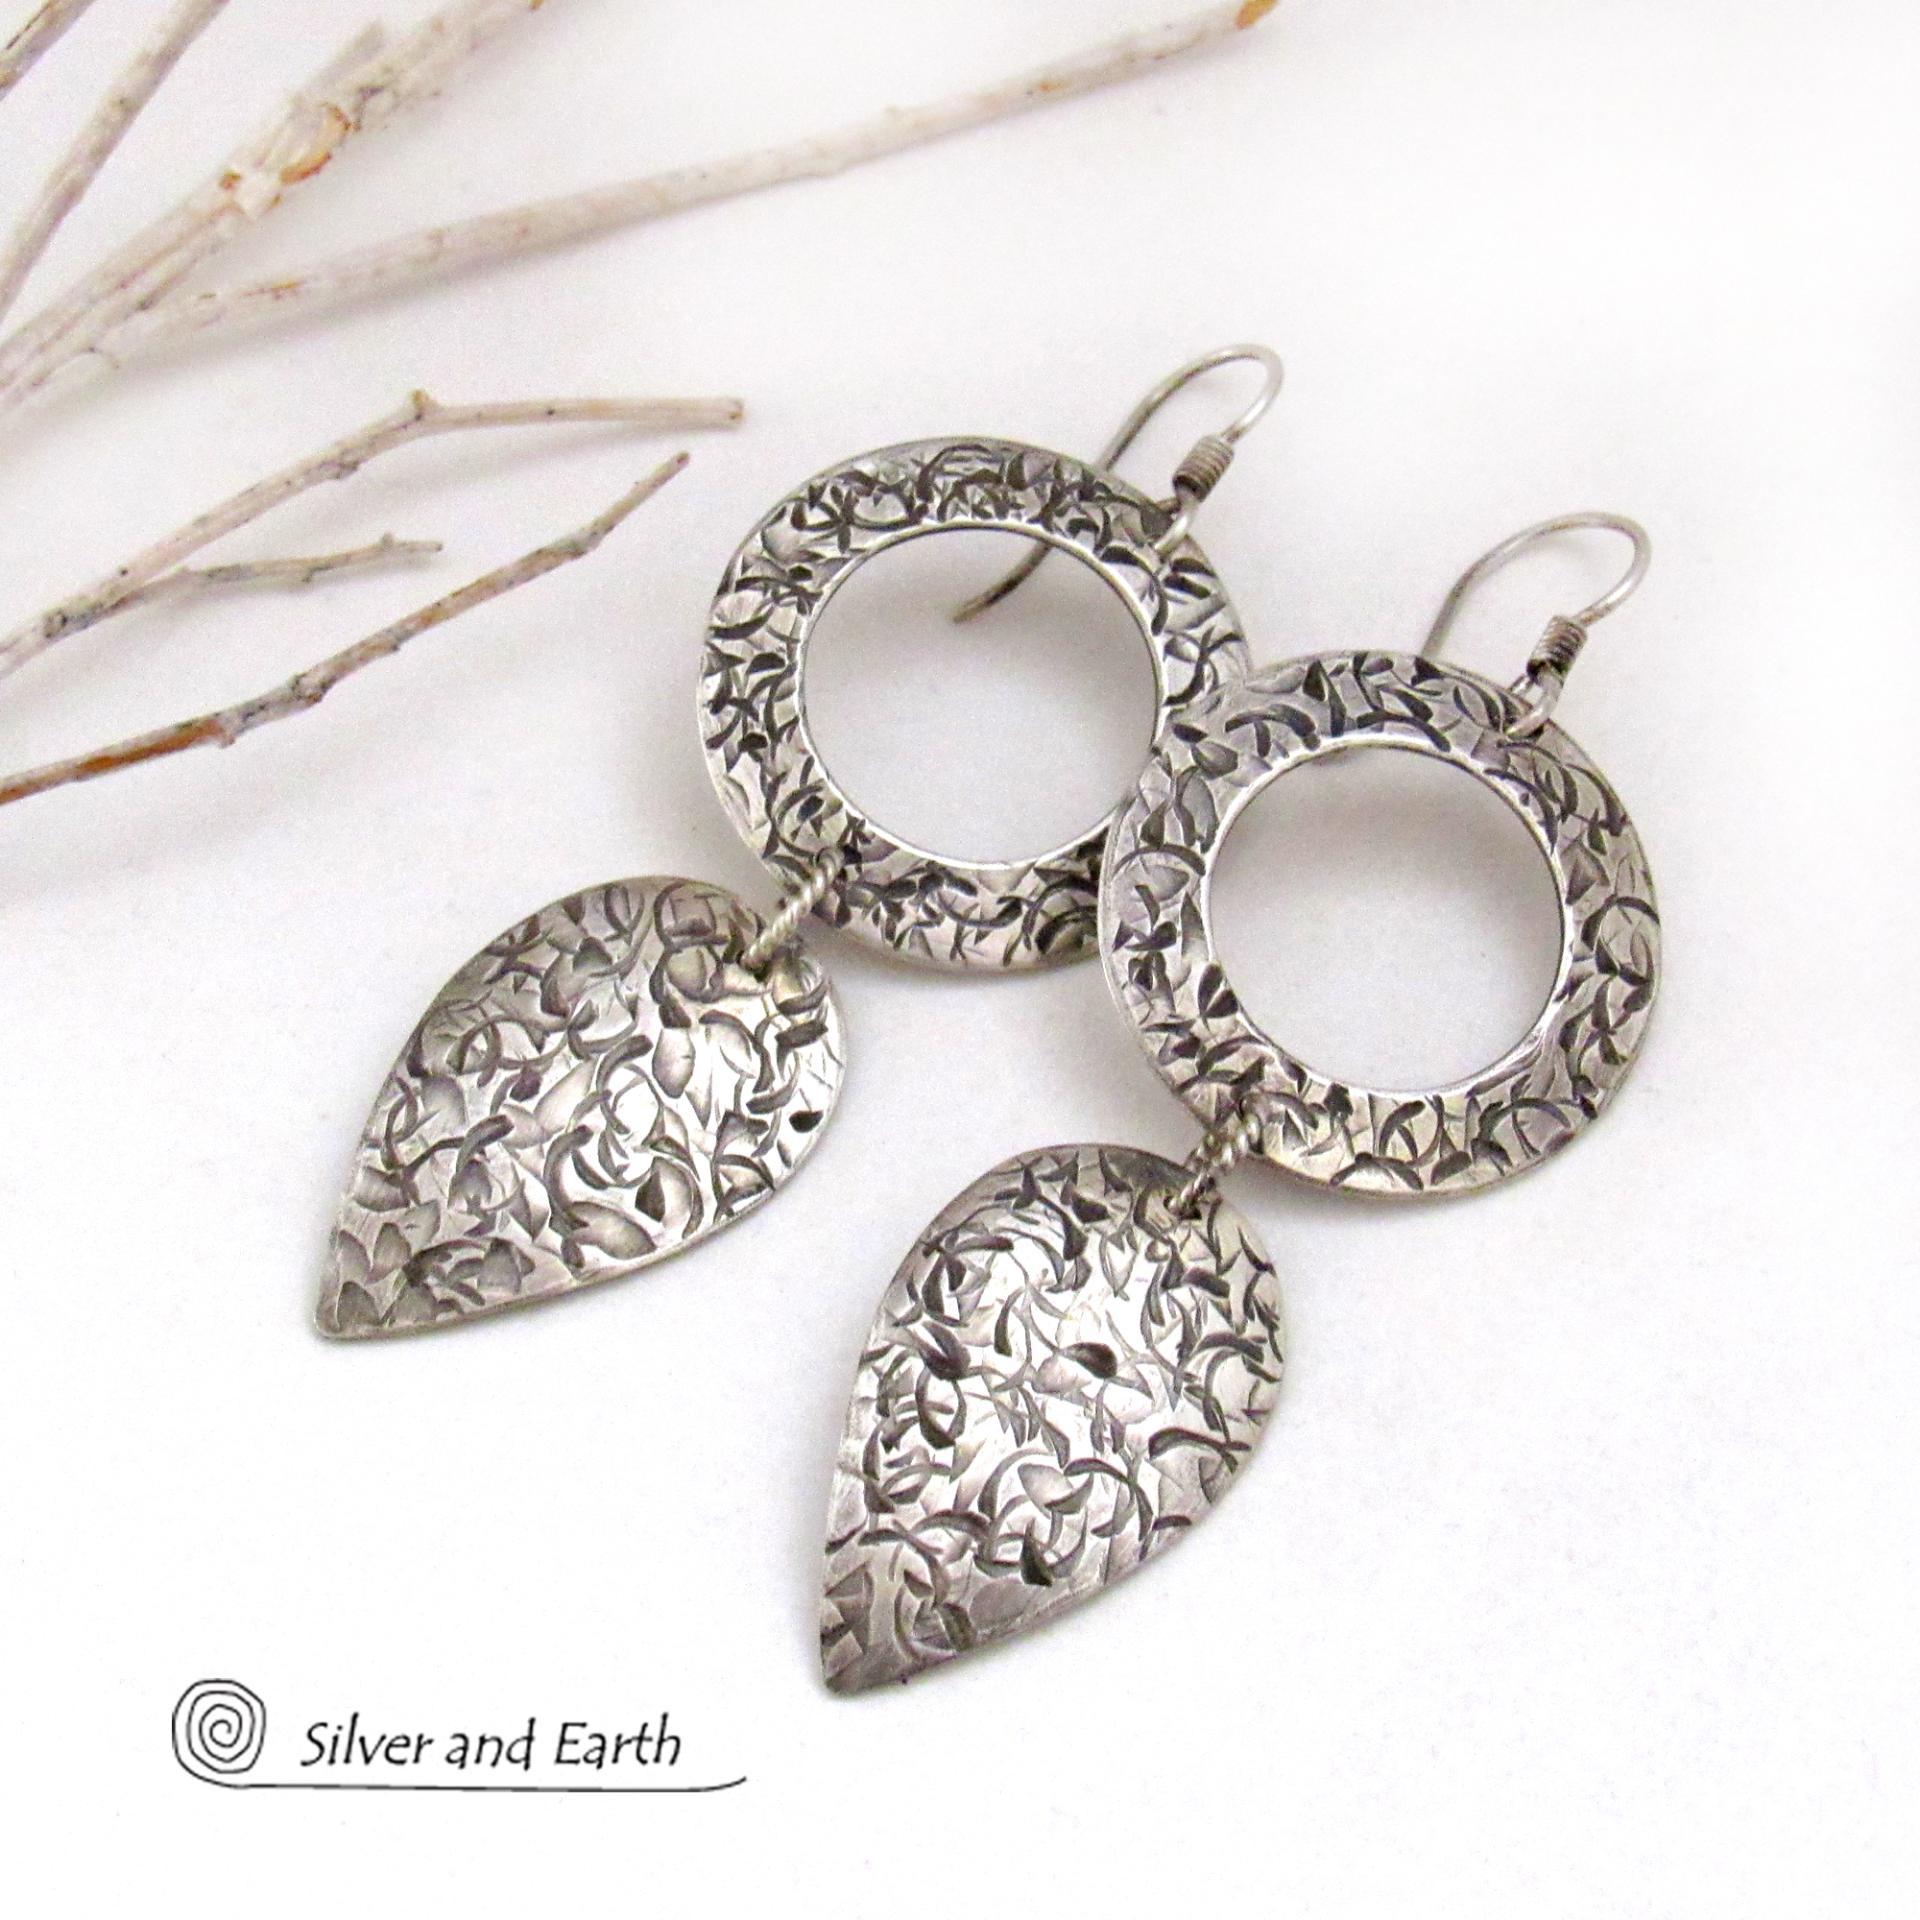 Textured Sterling Silver Dangle Earrings - Modern Contemporary Silver Jewelry